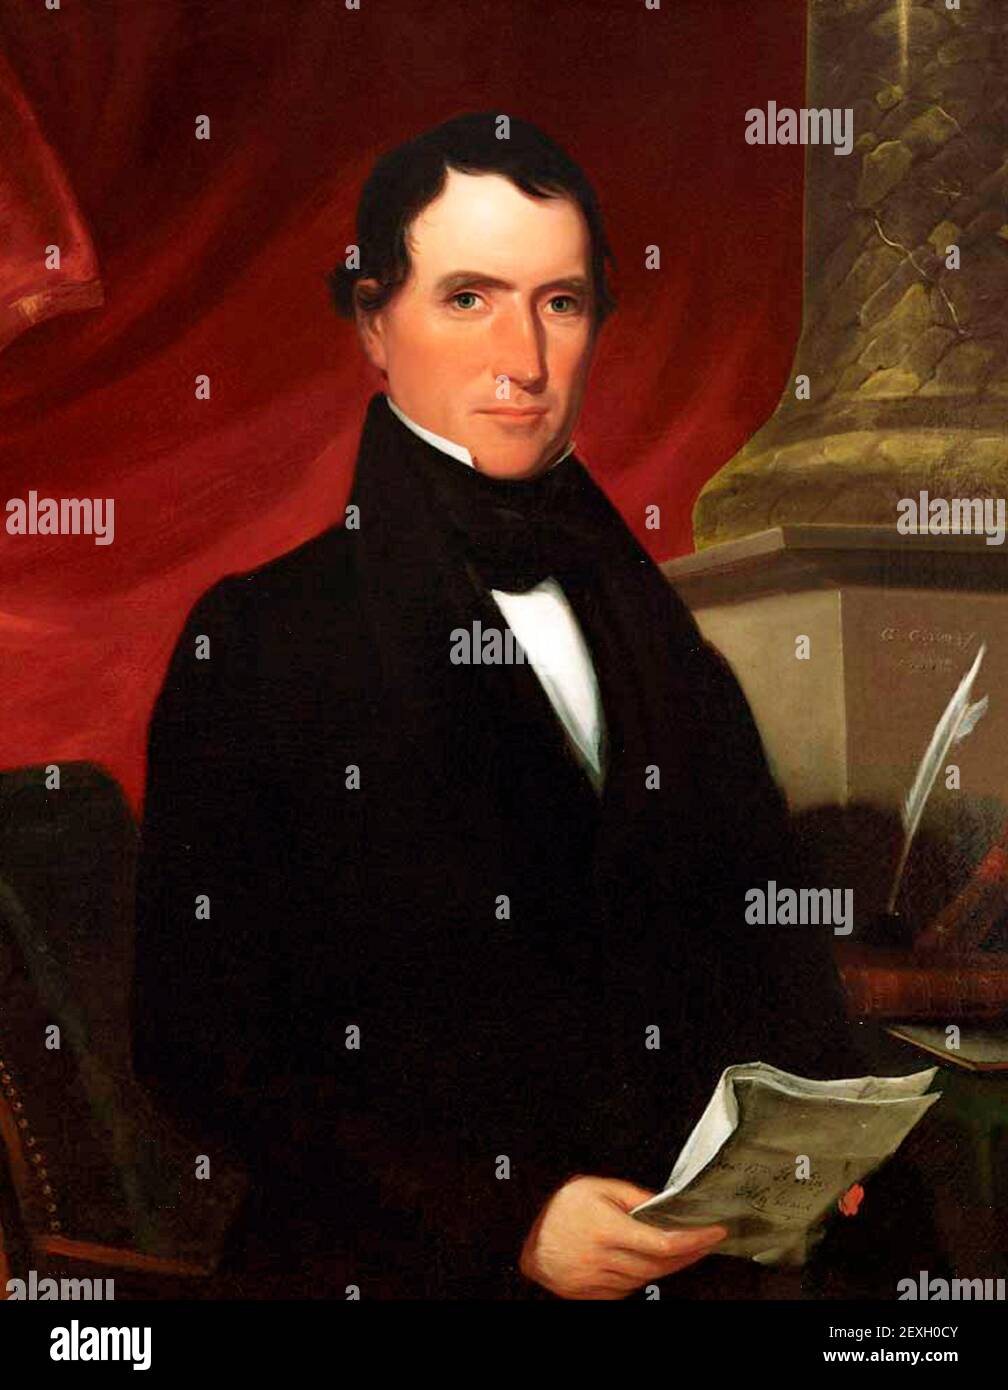 Oil on canvas portrait of William R. King (April 7, 1786 – April 18, 1853) -  George Cooke, 1839 - William Rufus DeVane King was an American politician and diplomat. He was the 13th vice president of the United States for six weeks in 1853 before his death. Stock Photo